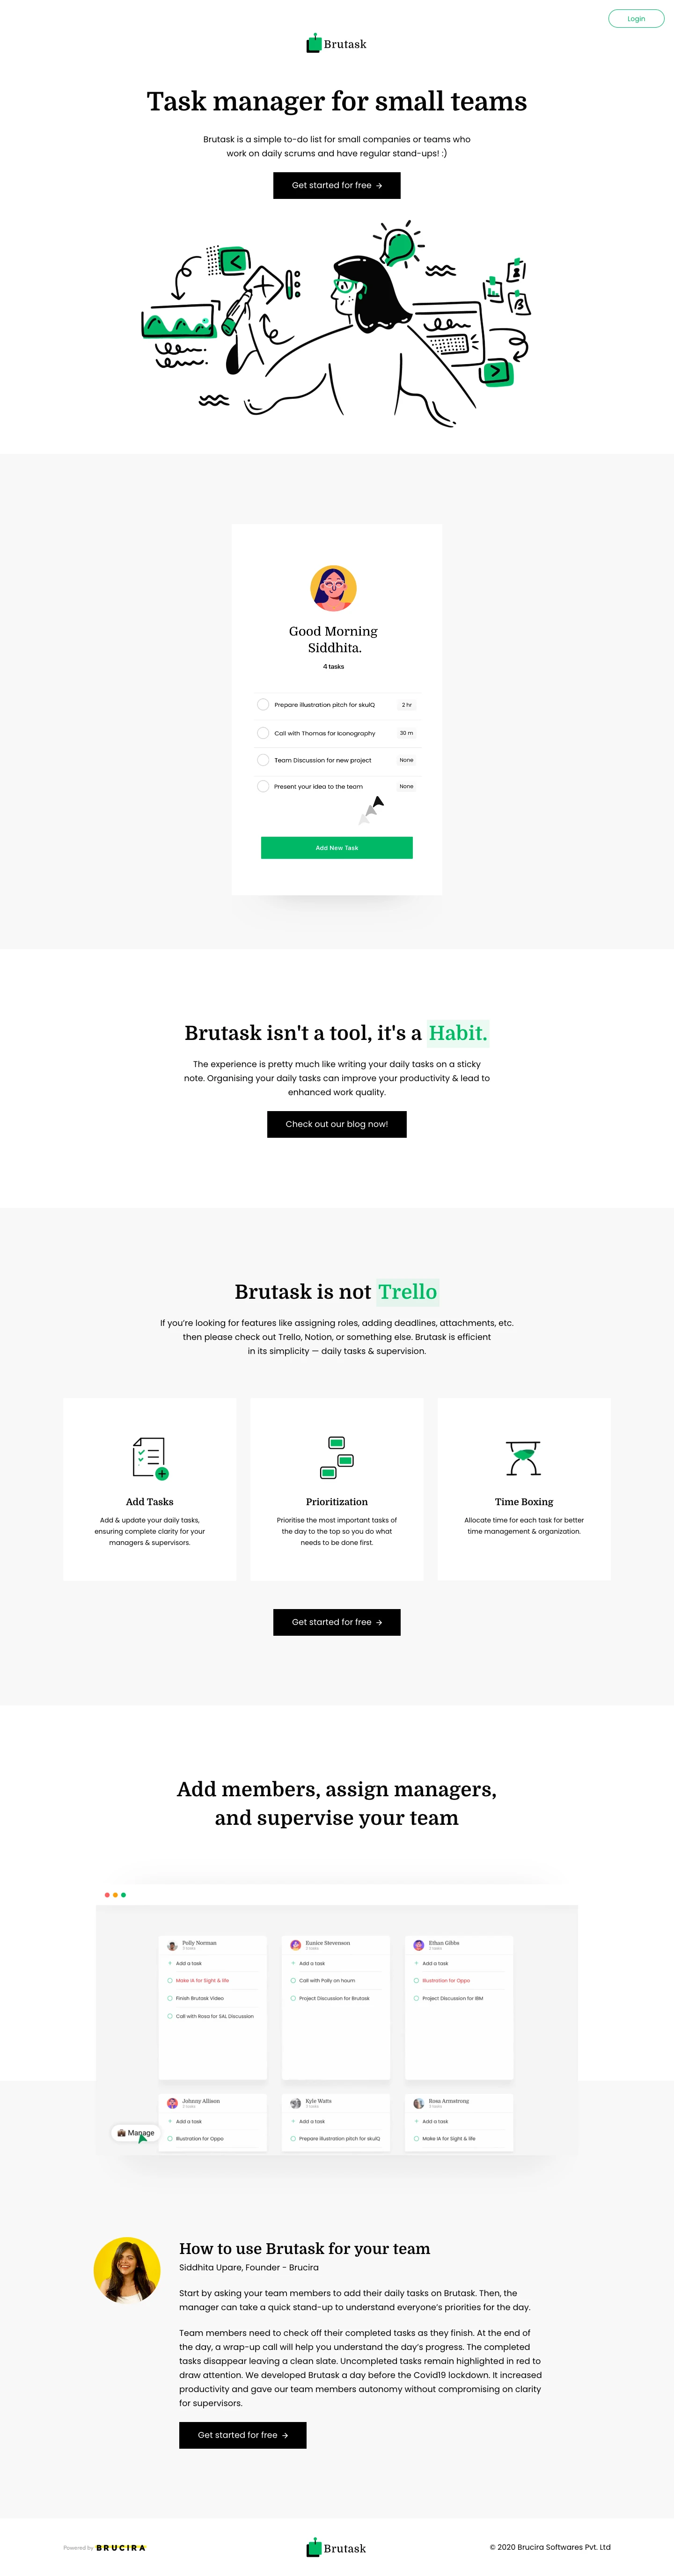 Brutask Landing Page Example: Brutask is a simple task management app created by Brucira, for small teams who take regular stand-ups.  Add tasks, allocate time, and supervise your teams daily progress.